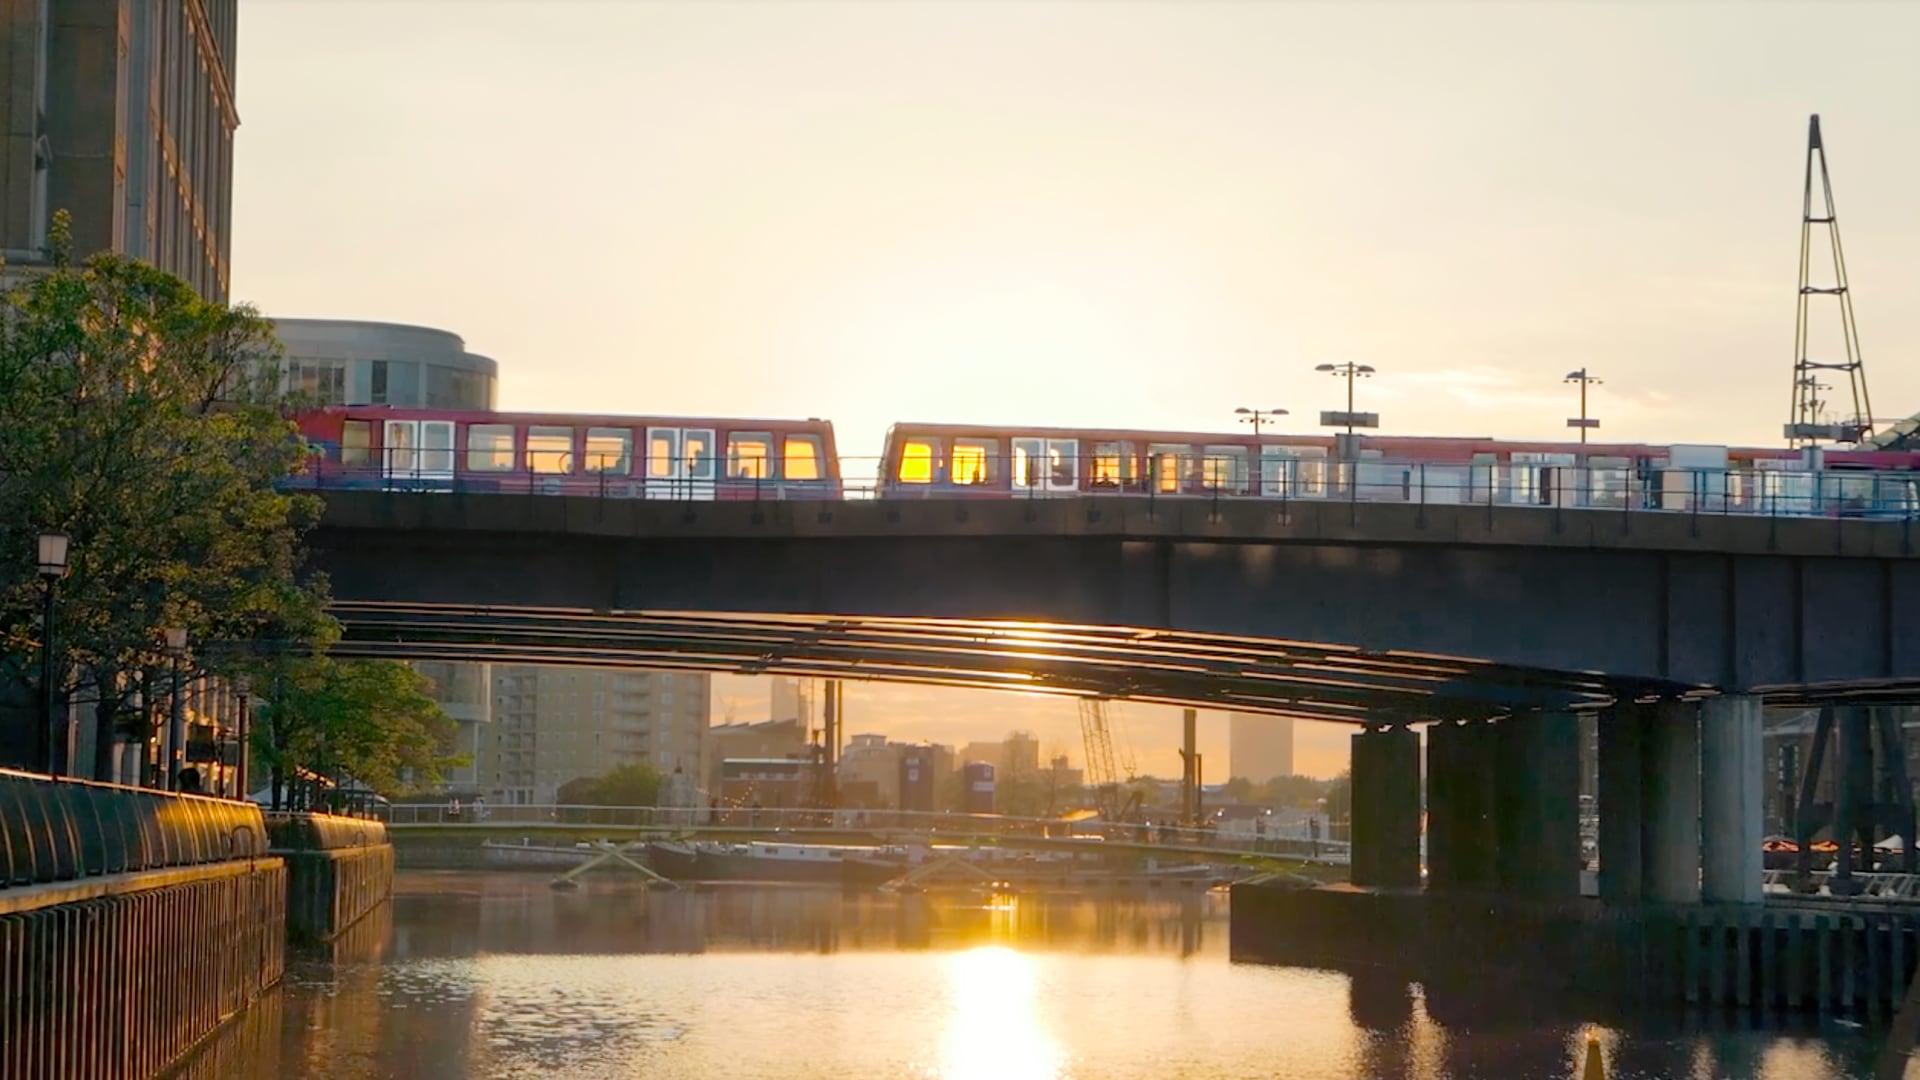 A train traveling over a bridge with a city skyline in the background